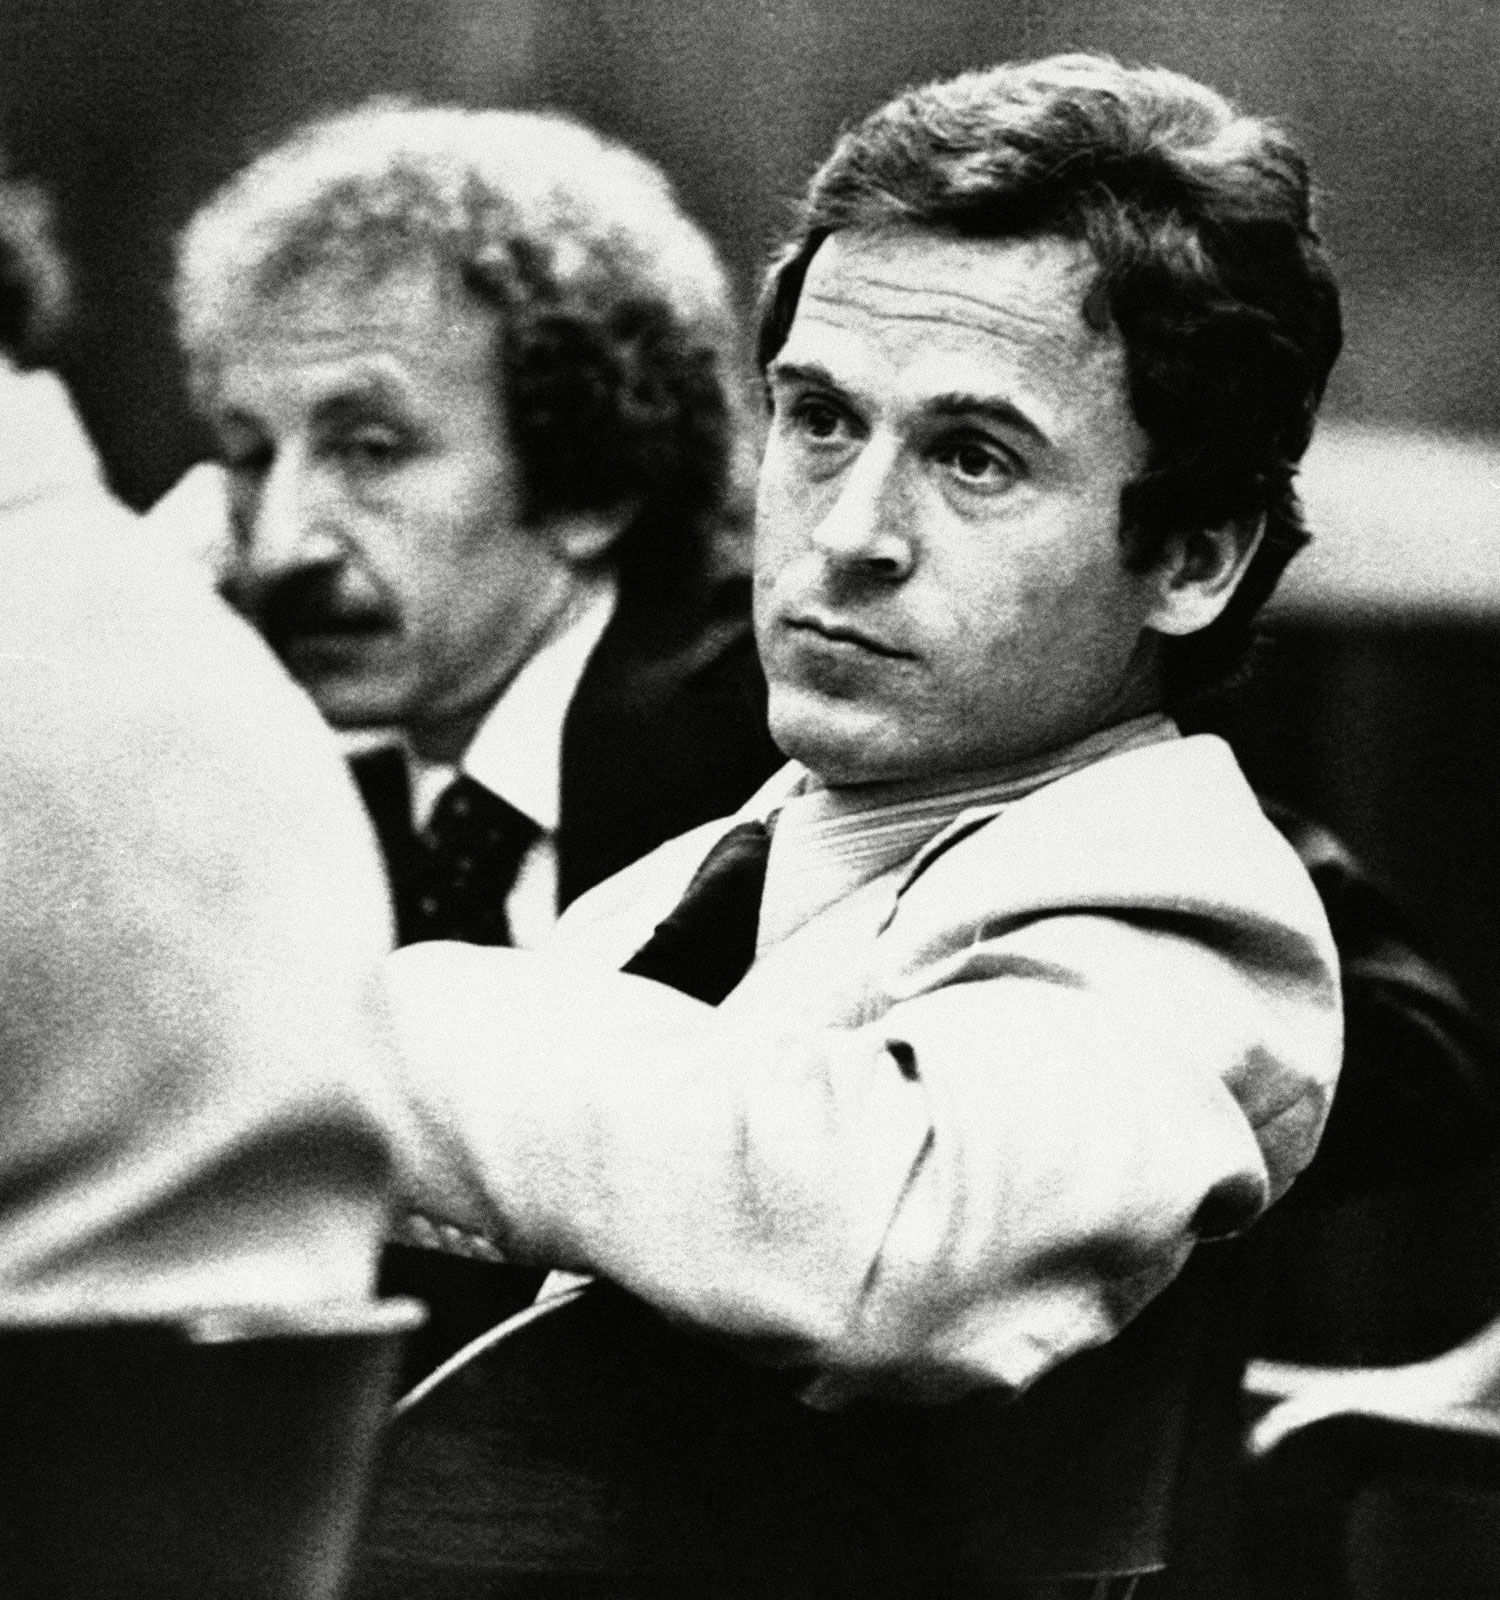 Ted Bundy trial Florida Tallahassee 1979